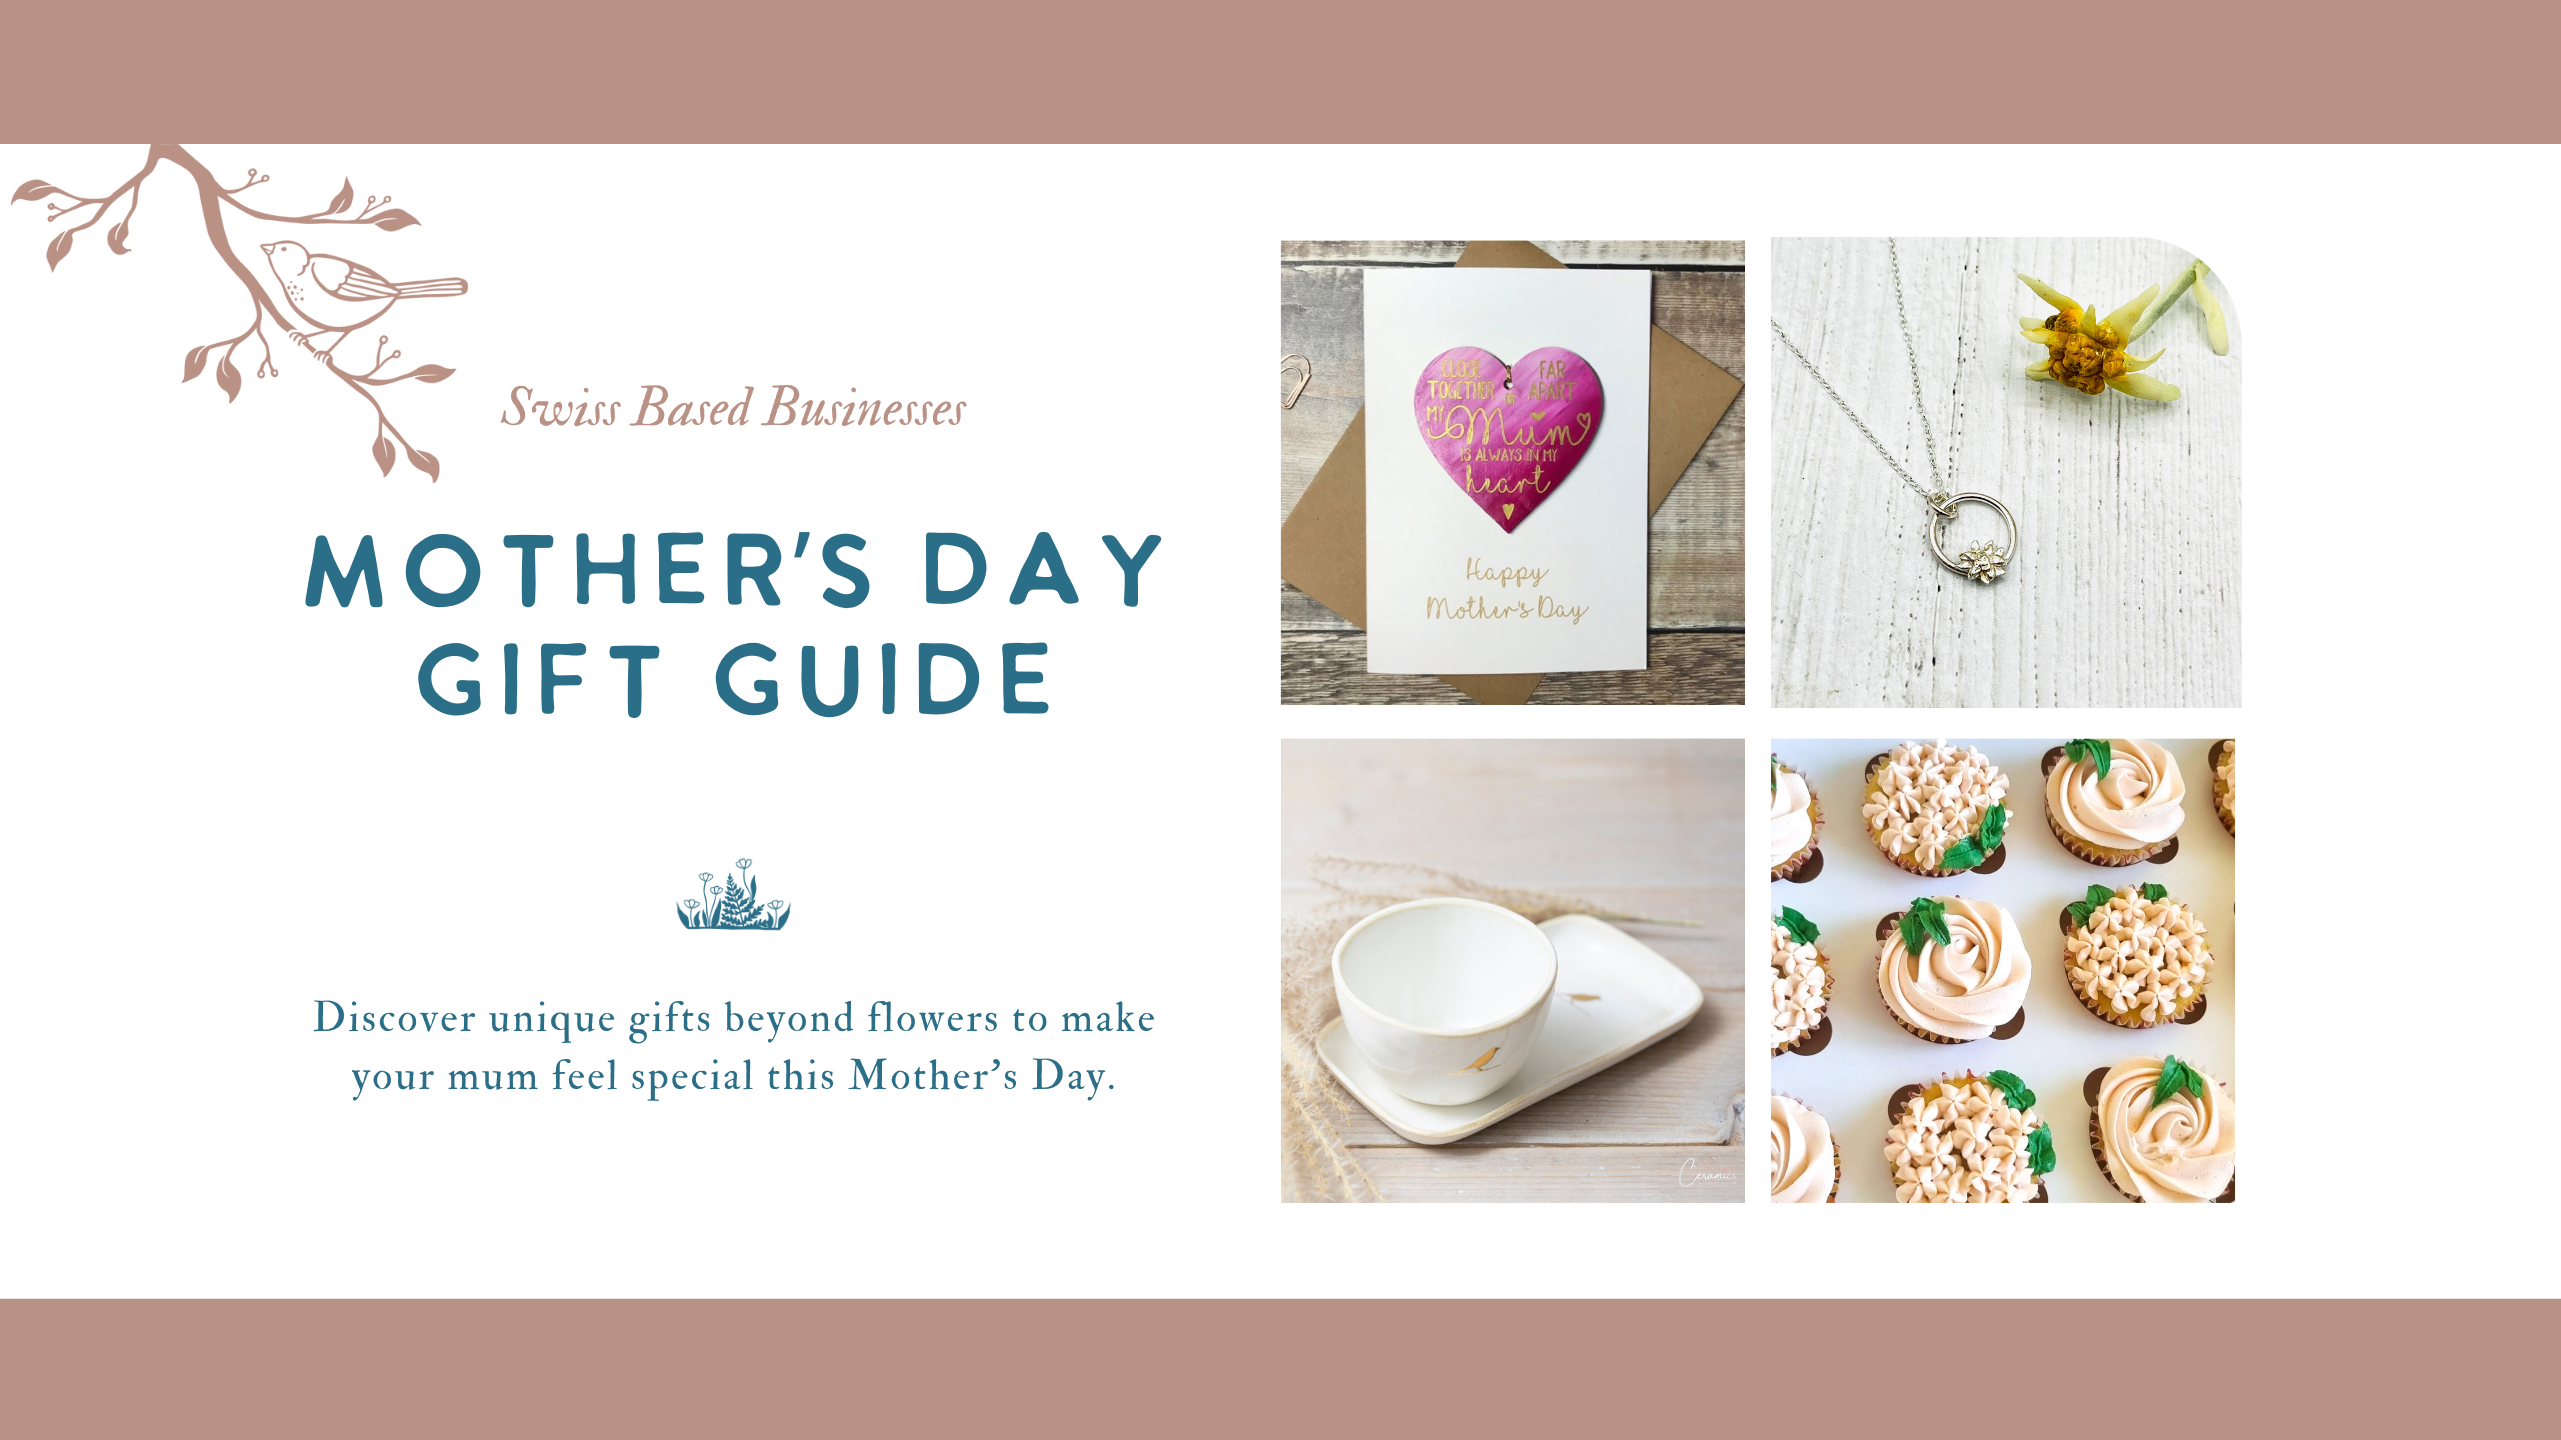 Discover unique gifts beyond flowers to make your mum feel special this Mother’s Day with gifts from small businesses based in Switzerland